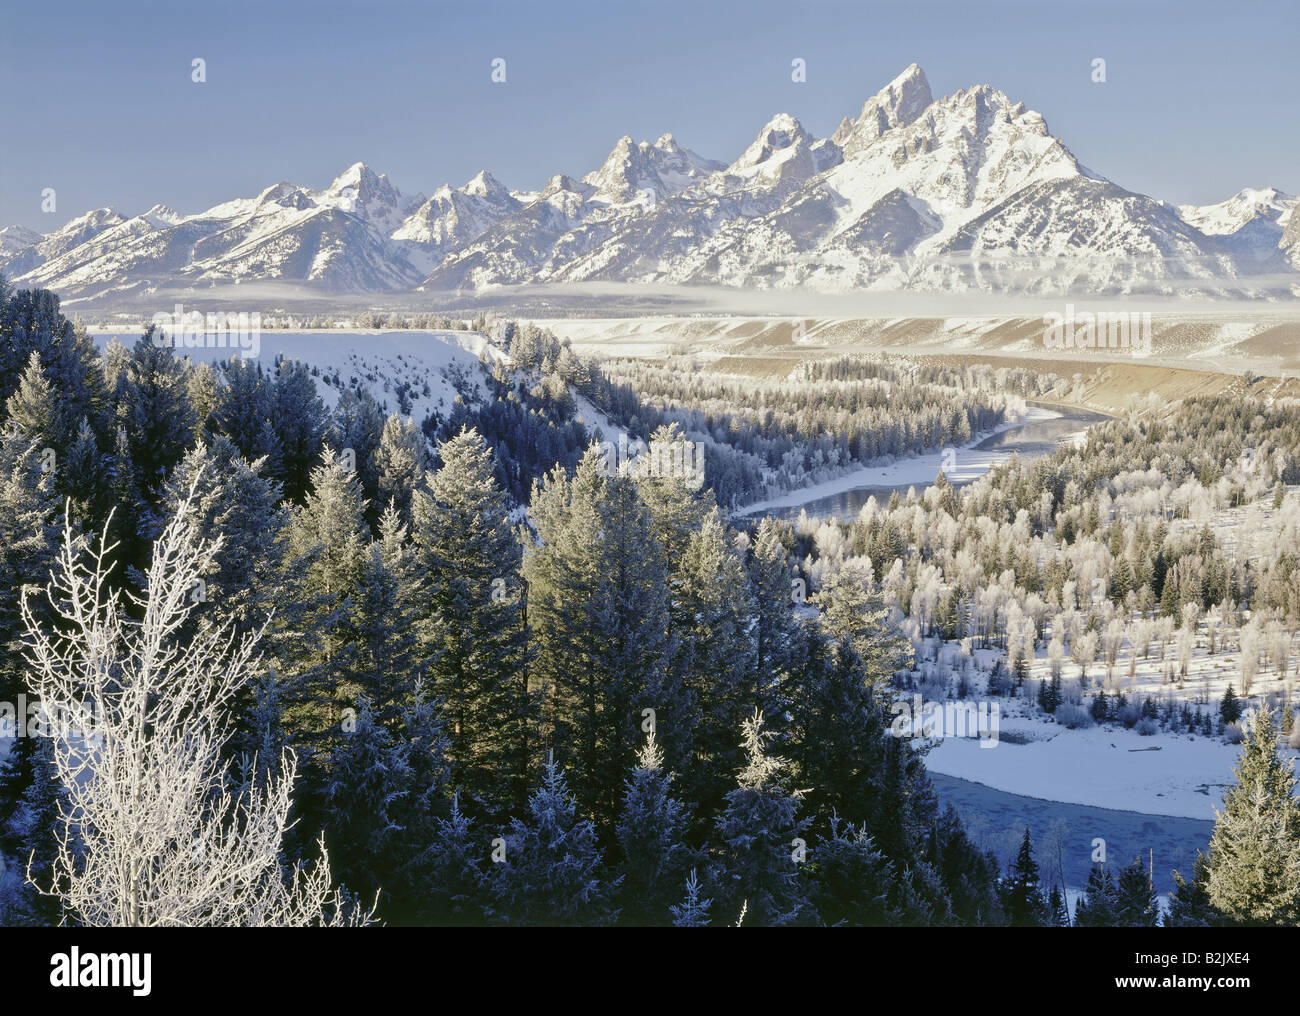 Geographie/Reisen, USA, Wyoming, Landschaften, Grand Teton National Park, Grand Teton Bergkette und Snake River, Additional-Rights - Clearance-Info - Not-Available Stockfoto